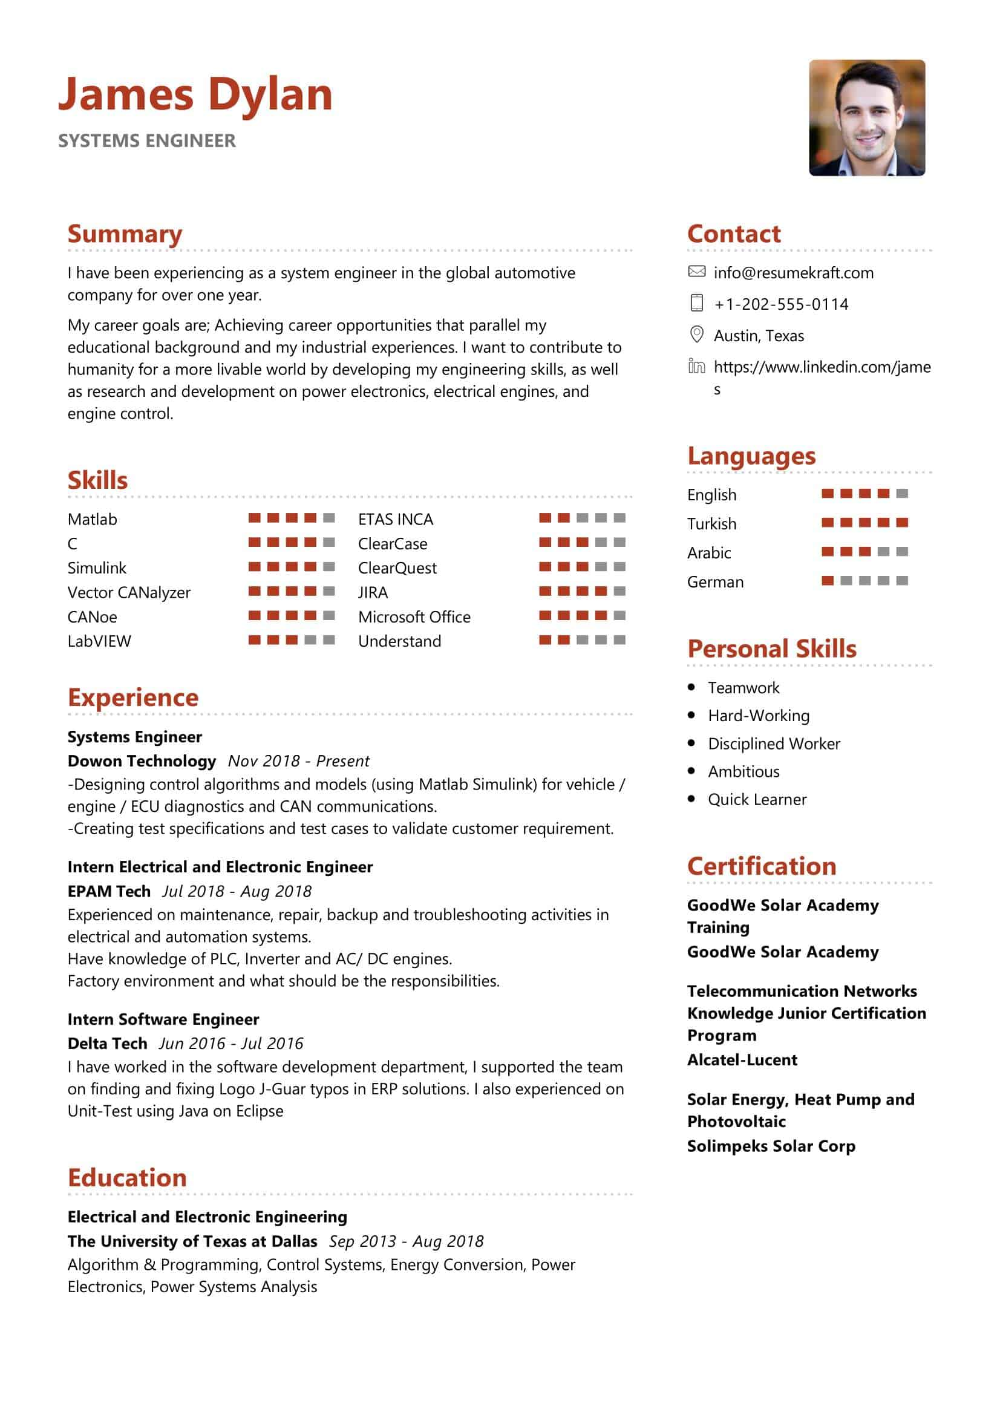 100+ Professional Resume Samples for 2020